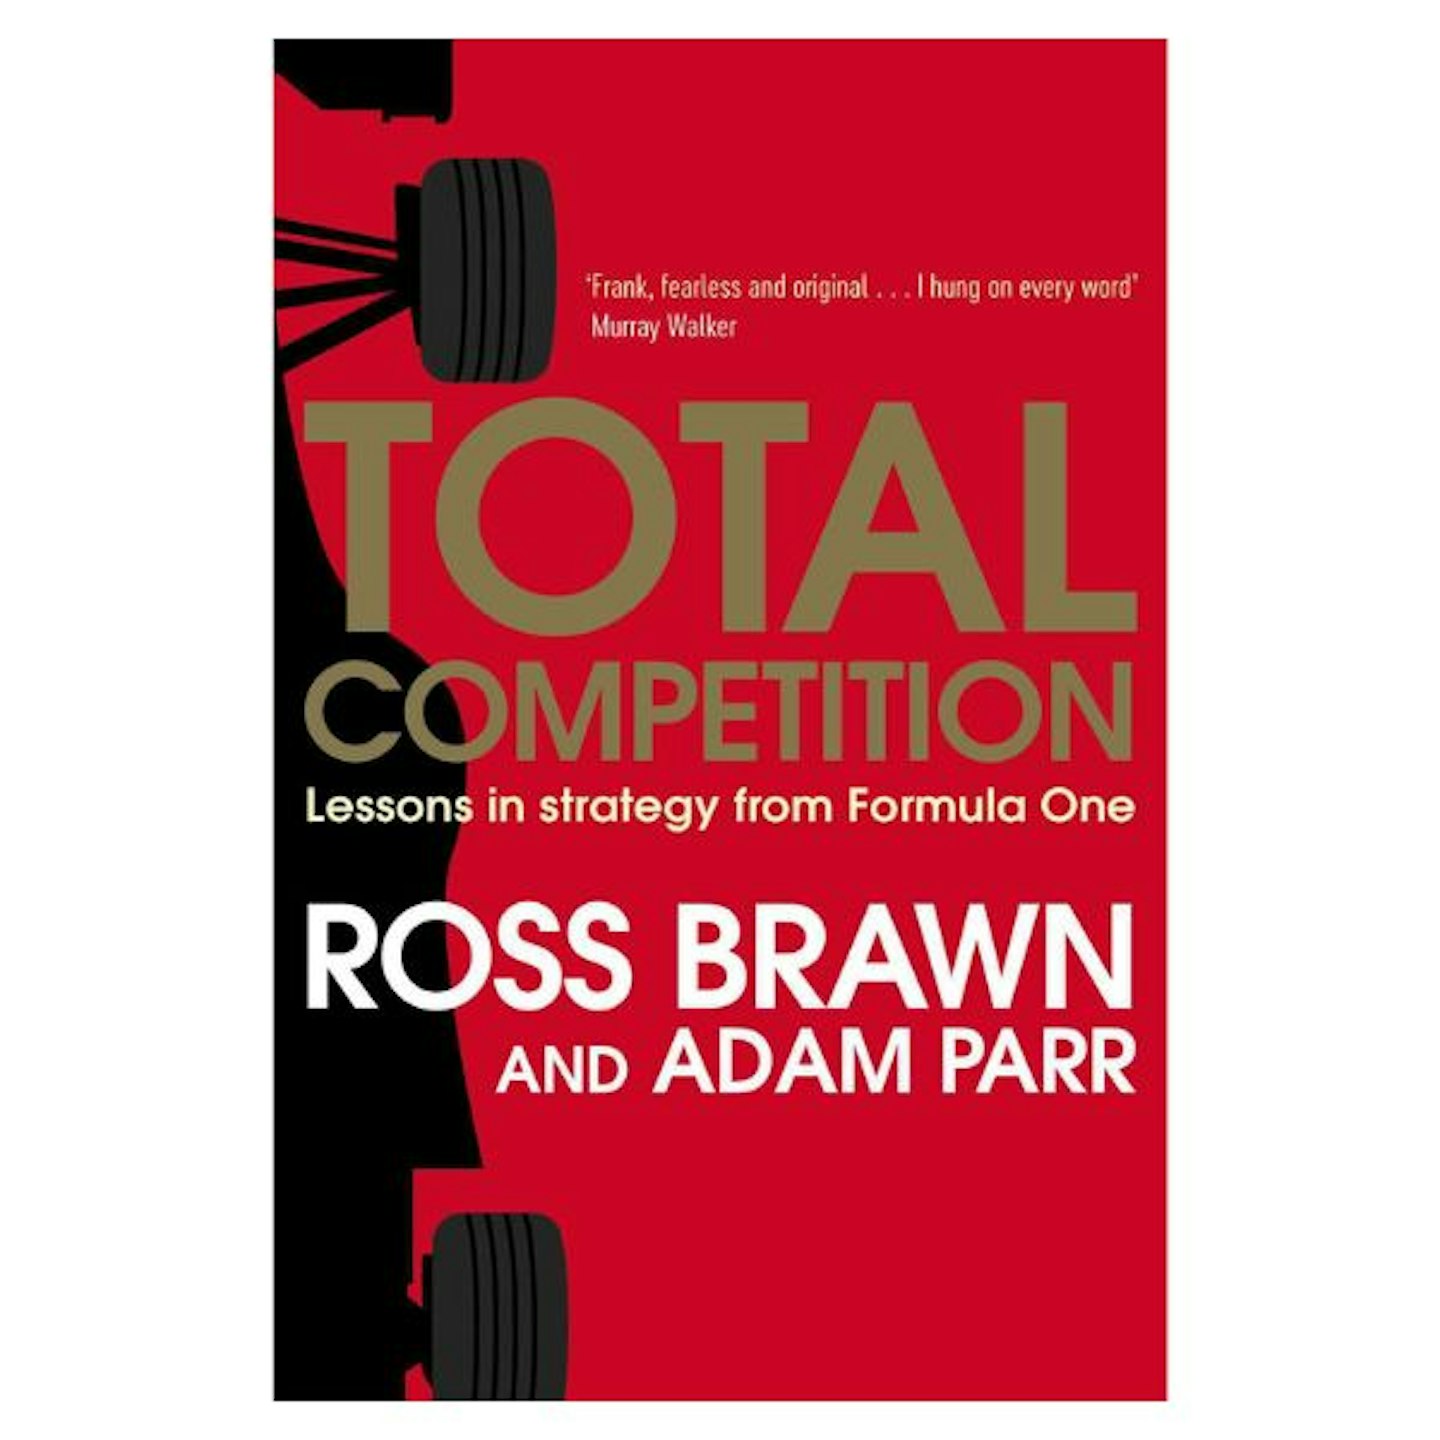 Total Competition: Lessons in Strategy from Formula One by Ross Brawn and Adam Parr